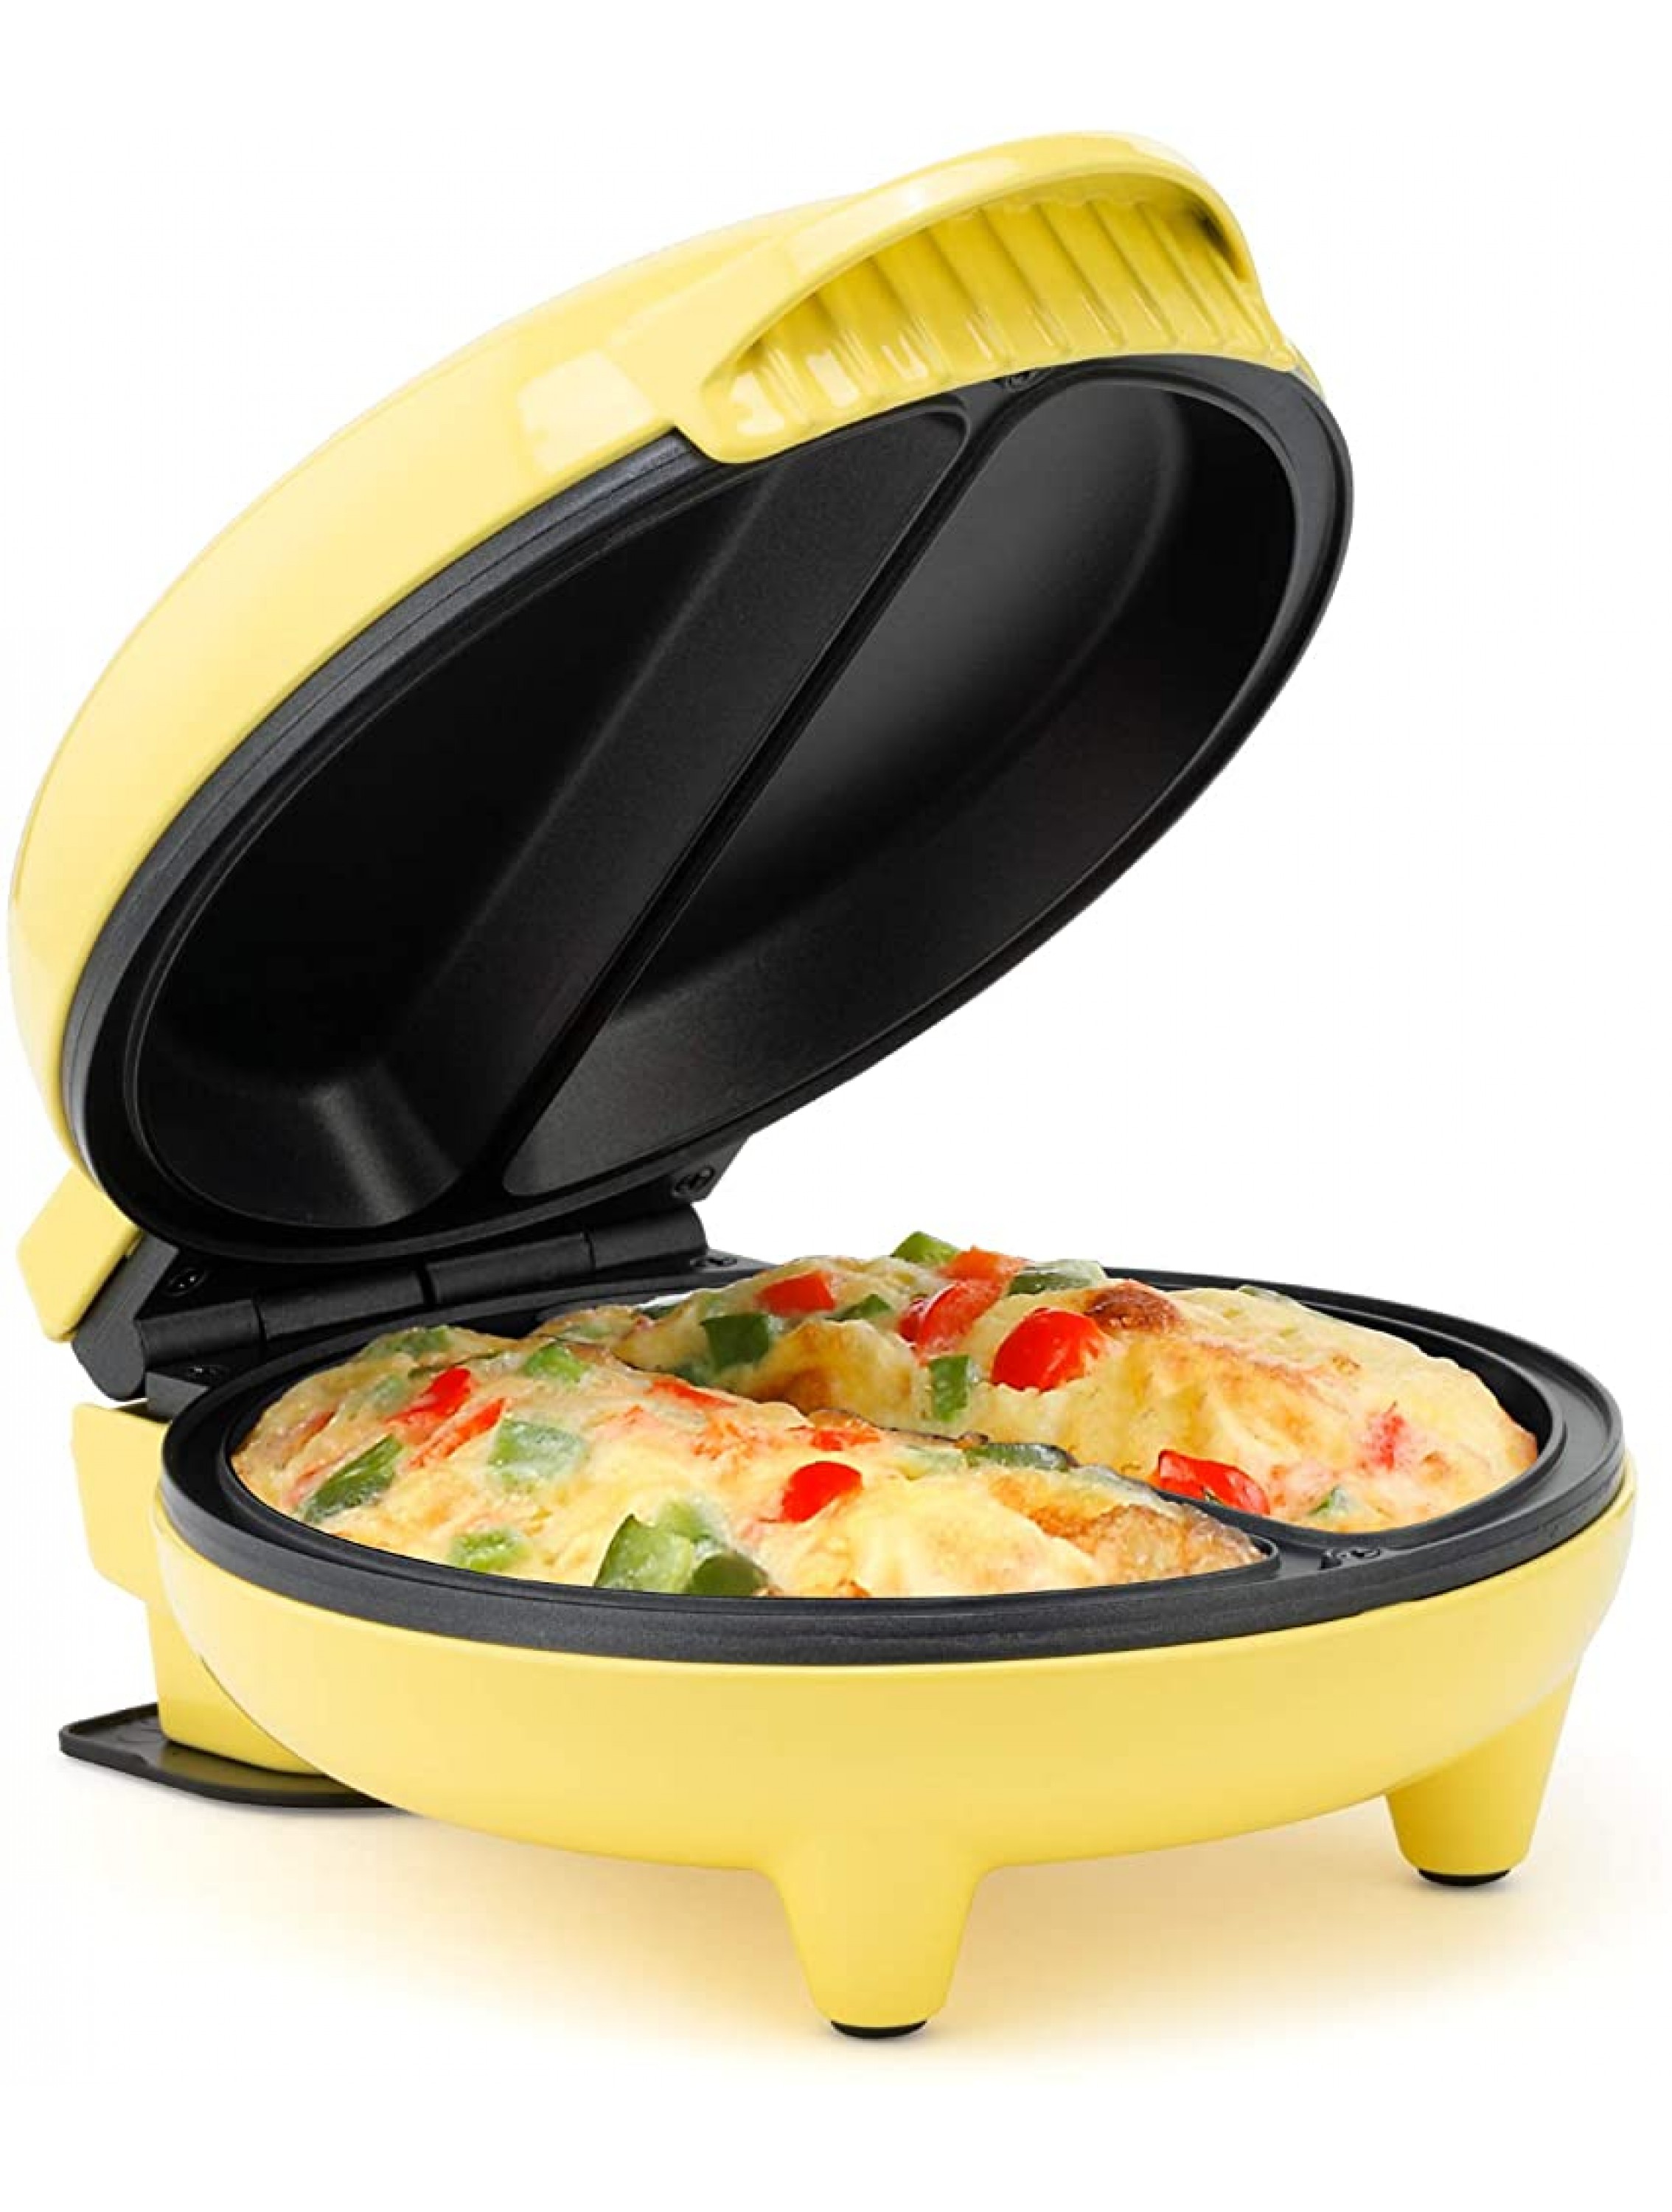 Holstein Housewares Non-Stick Omelet & Frittata Maker Black Stainless Steel Makes 2 Individual Portions Quick & Easy - B7PDELOCE